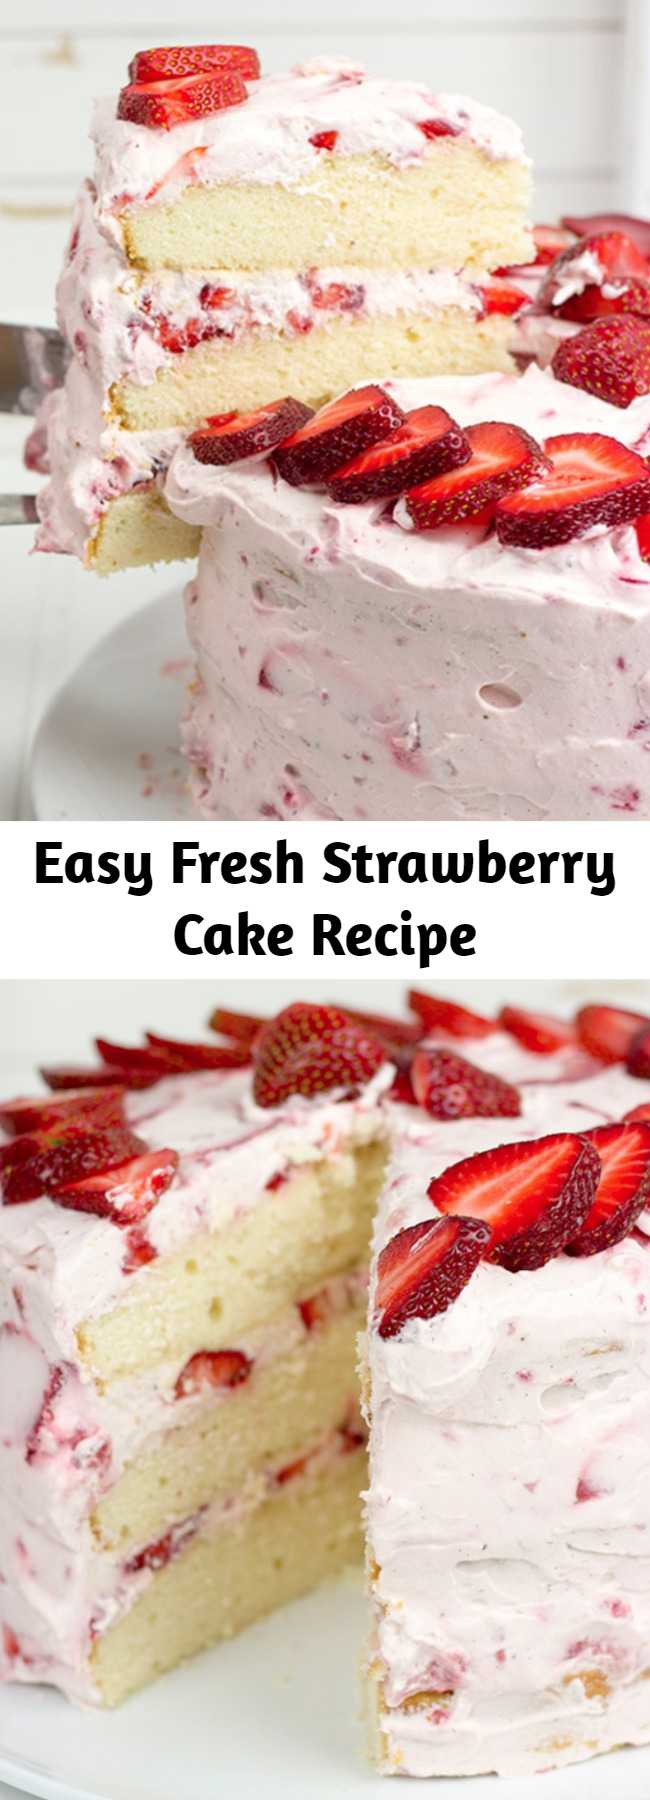 Easy Fresh Strawberry Cake Recipe - This cake features loads of fresh strawberries and a light whipped cream topping. It's PERFECT for summer!!